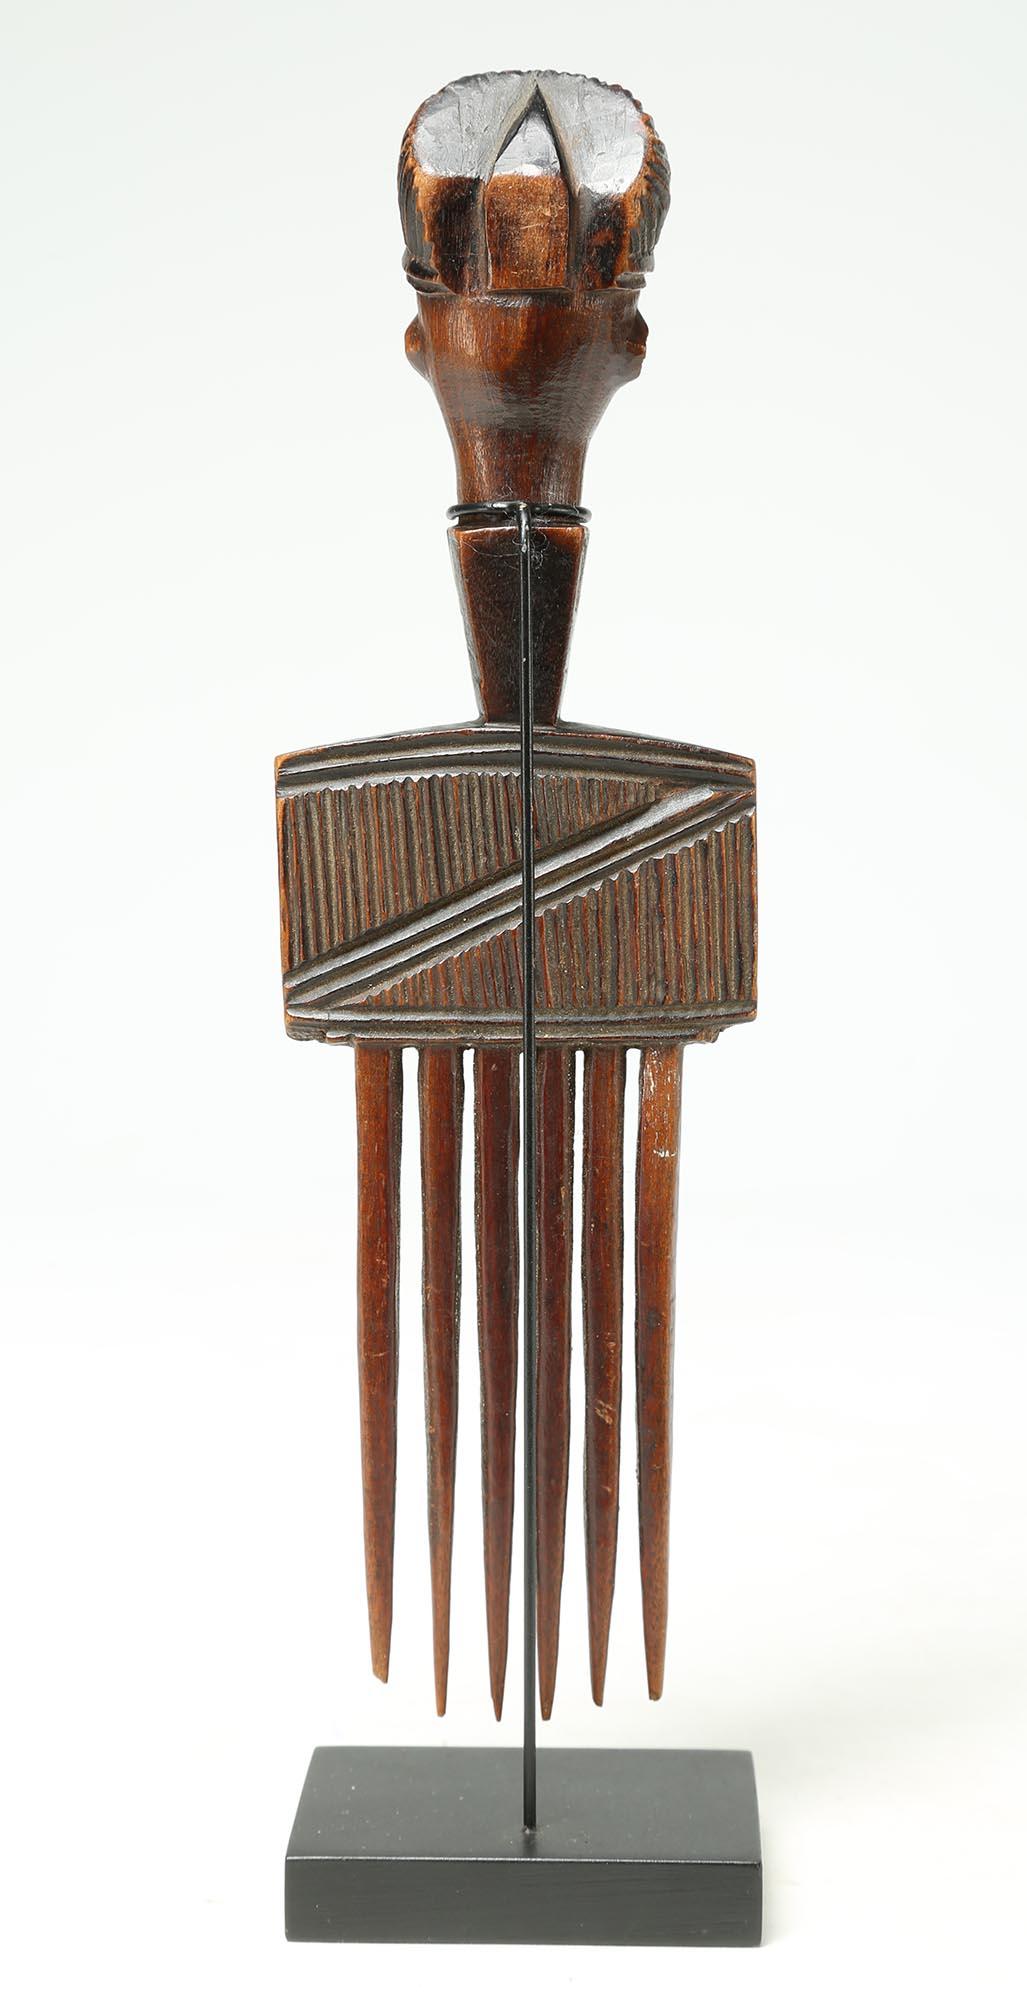 Finely carved wood Luena comb with great hair style, Angola / Democratic Republic of Congo, late 19th-early 20th century. 9